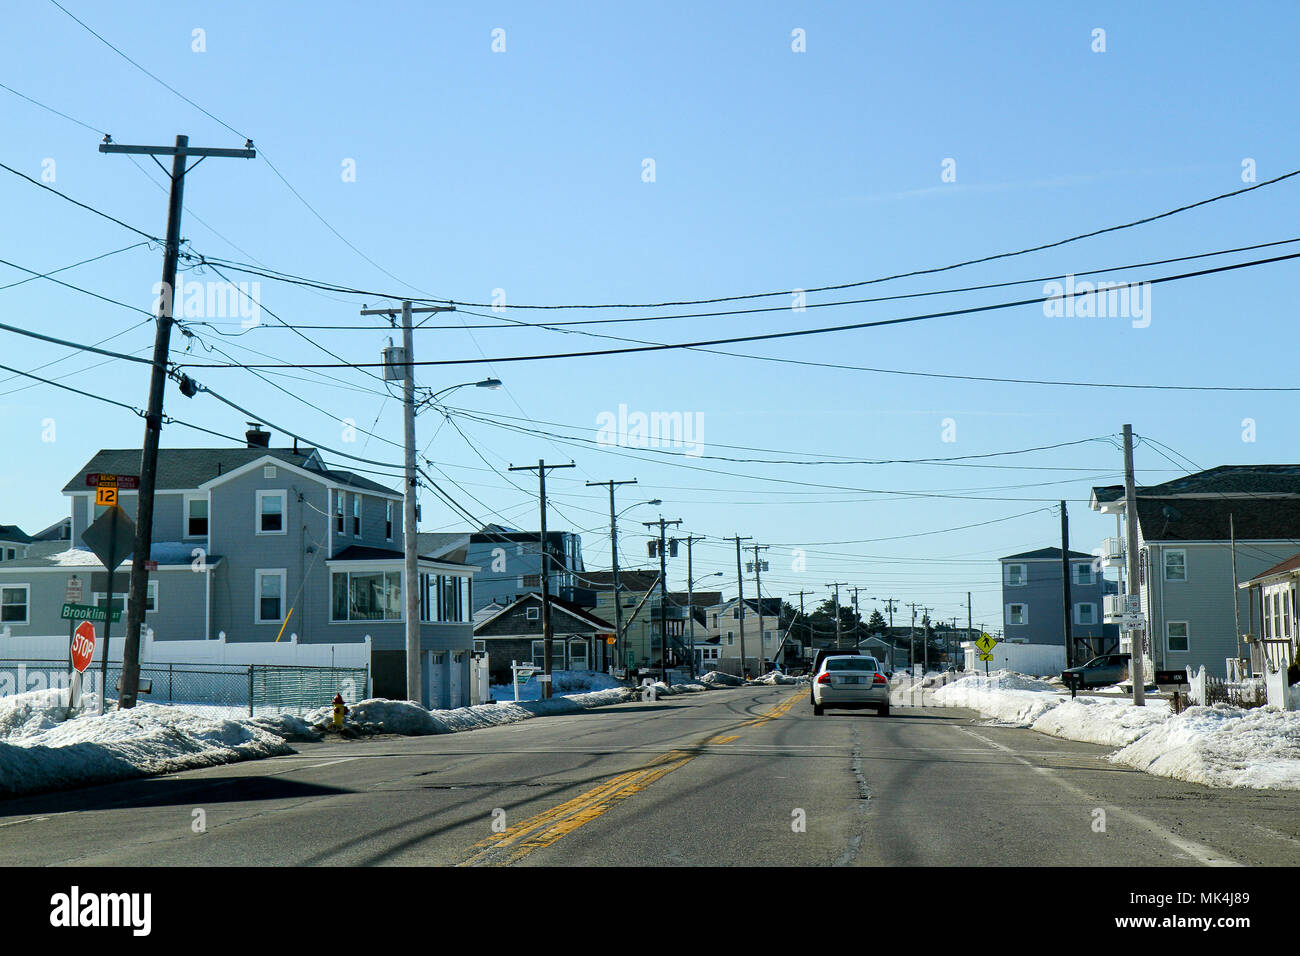 Winter in Seabrook, New Hampshire, United States Stock Photo